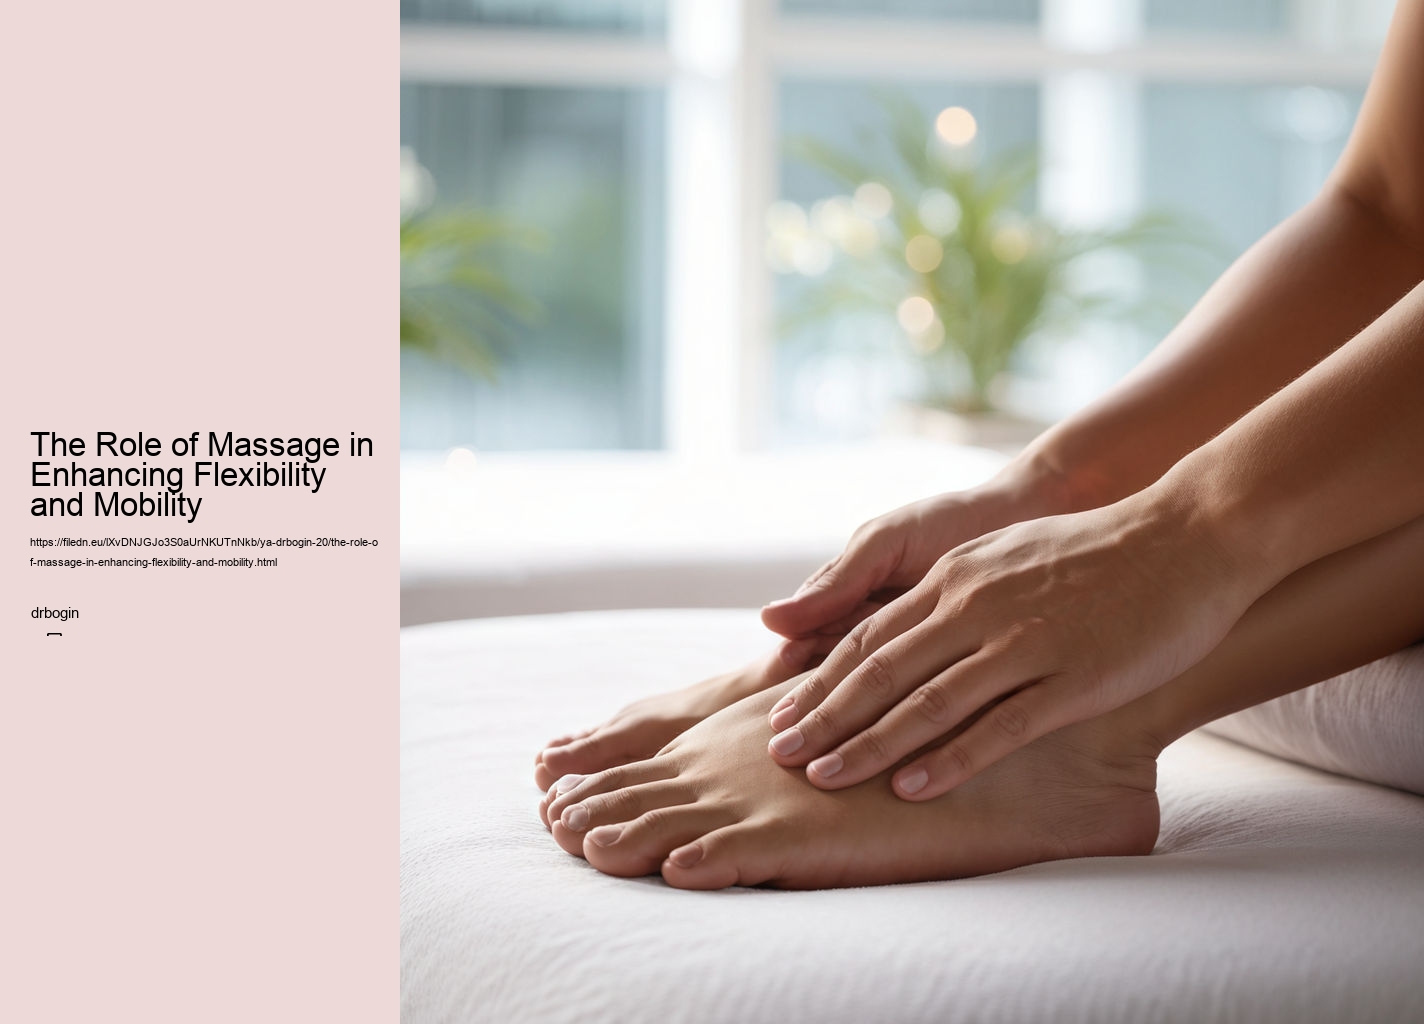 The Role of Massage in Enhancing Flexibility and Mobility